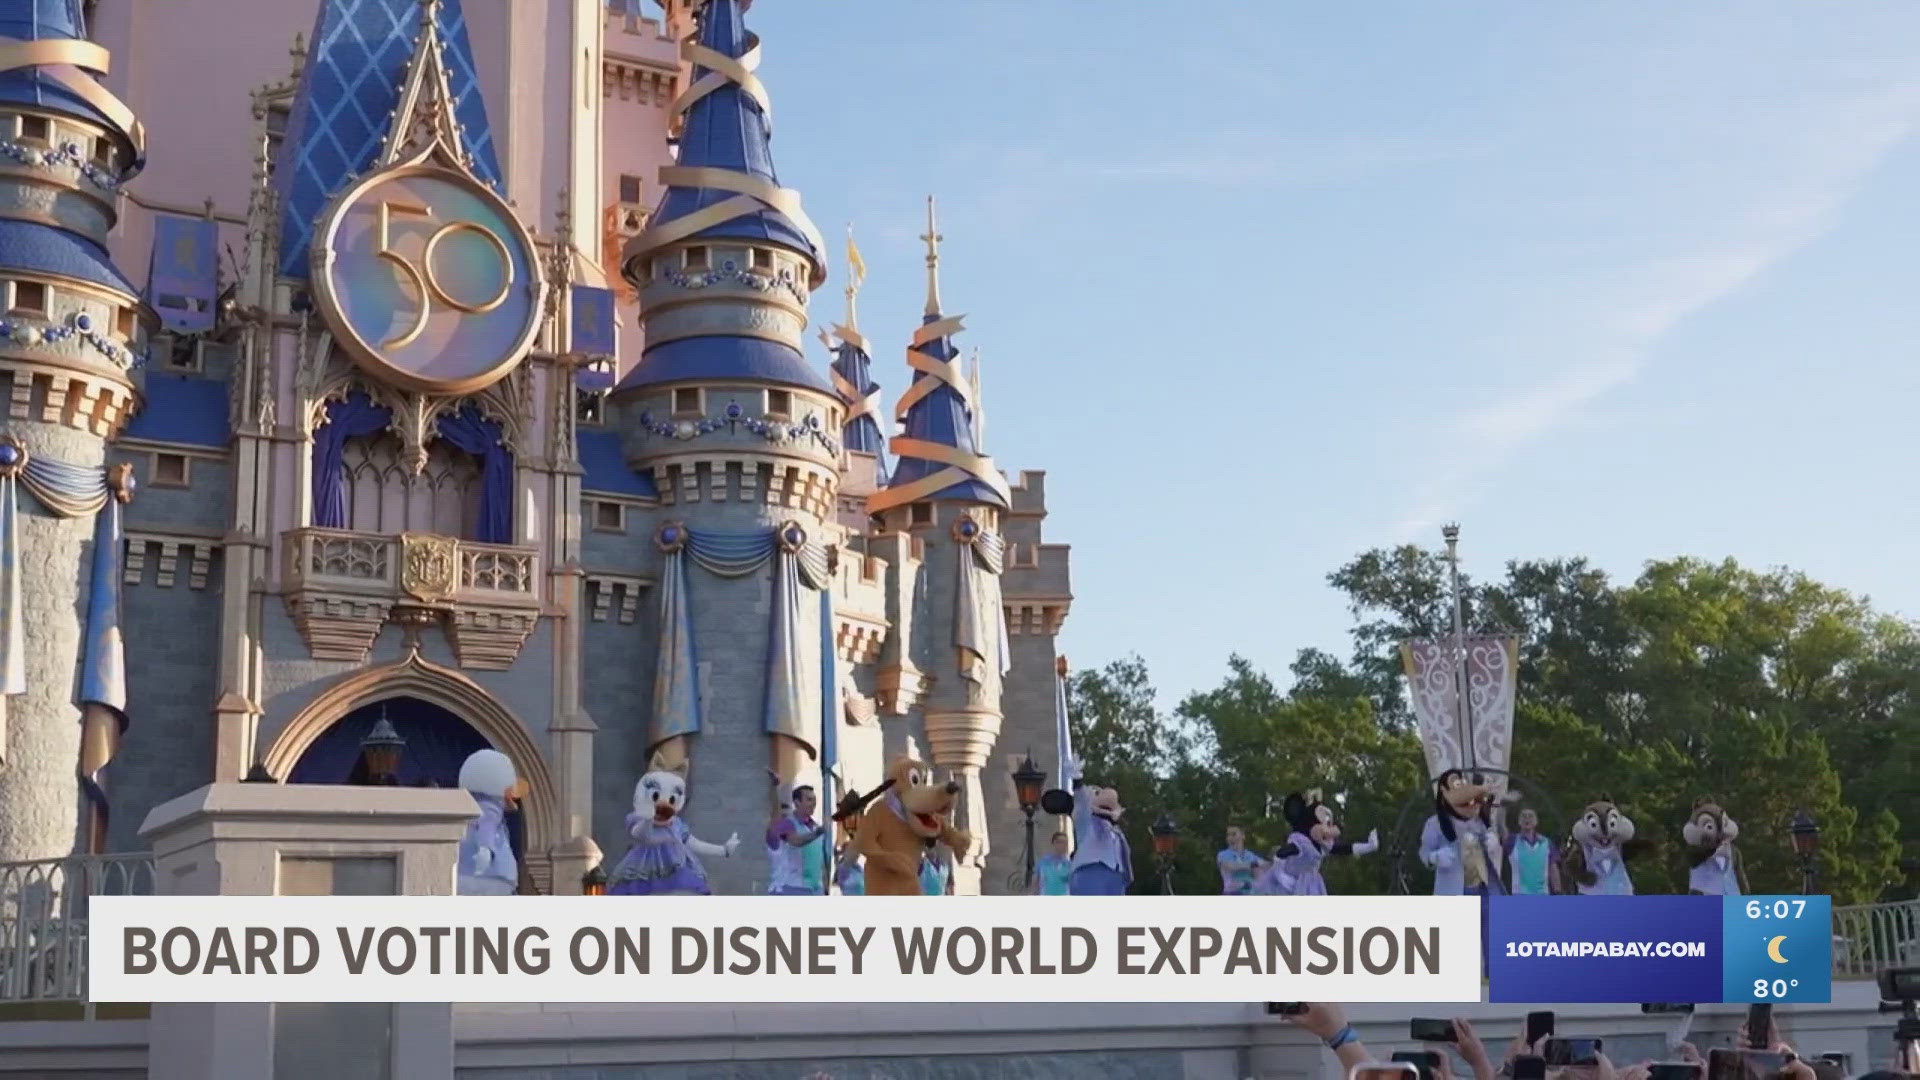 The board is expected to vote next week. If approved, Disney World Resort could potentially build another theme park.